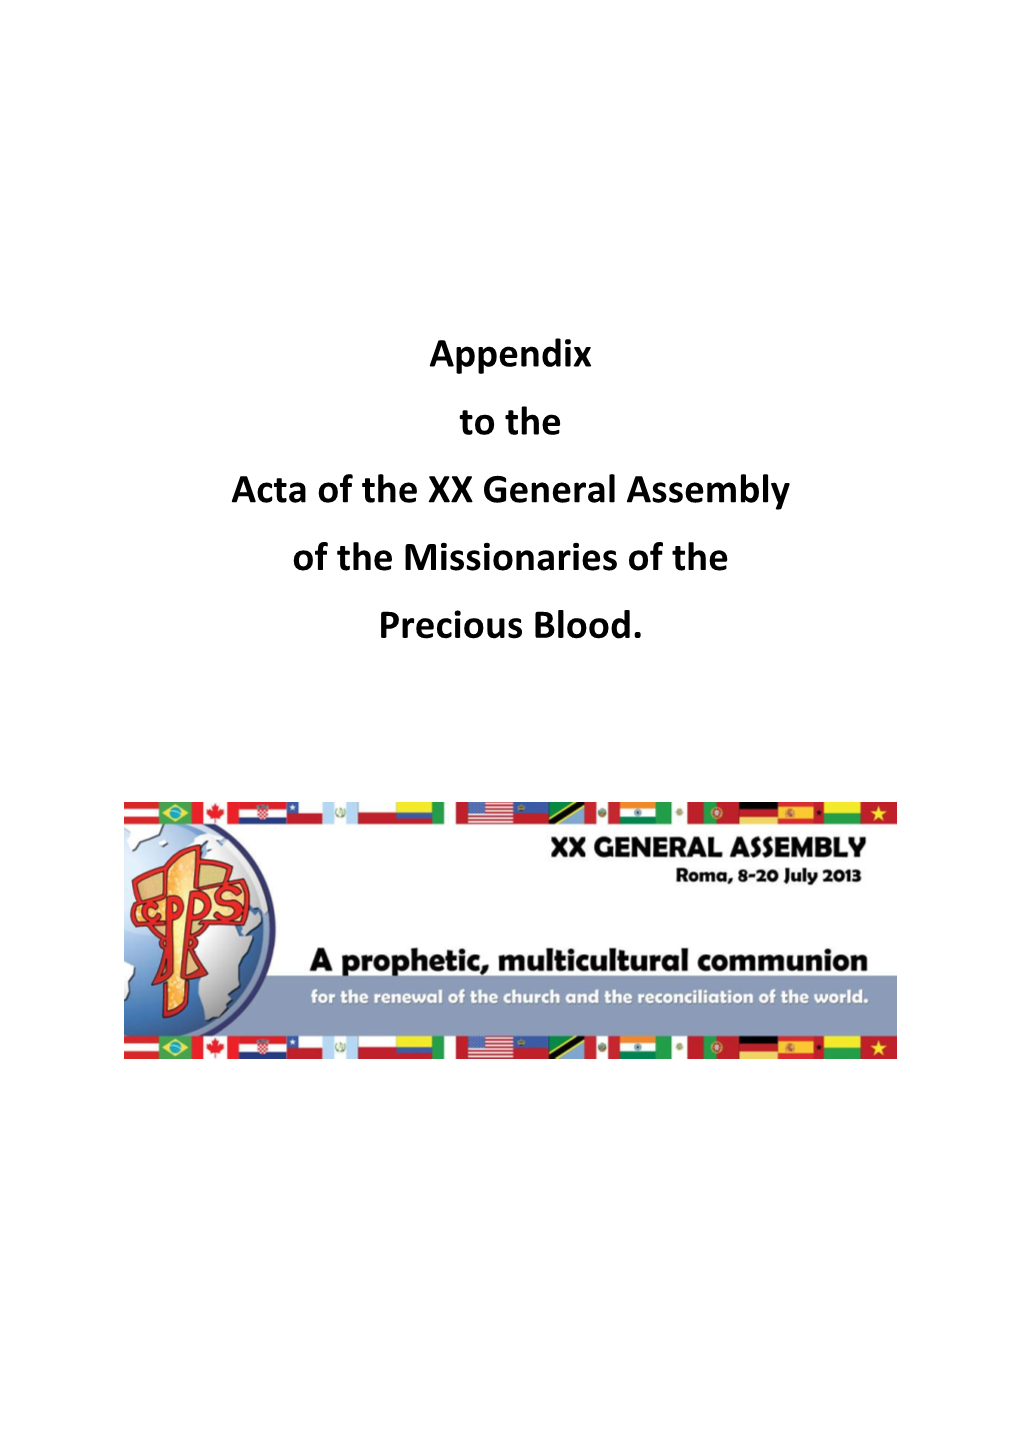 Appendix to the Acta of the XX General Assembly of the Missionaries of the Precious Blood